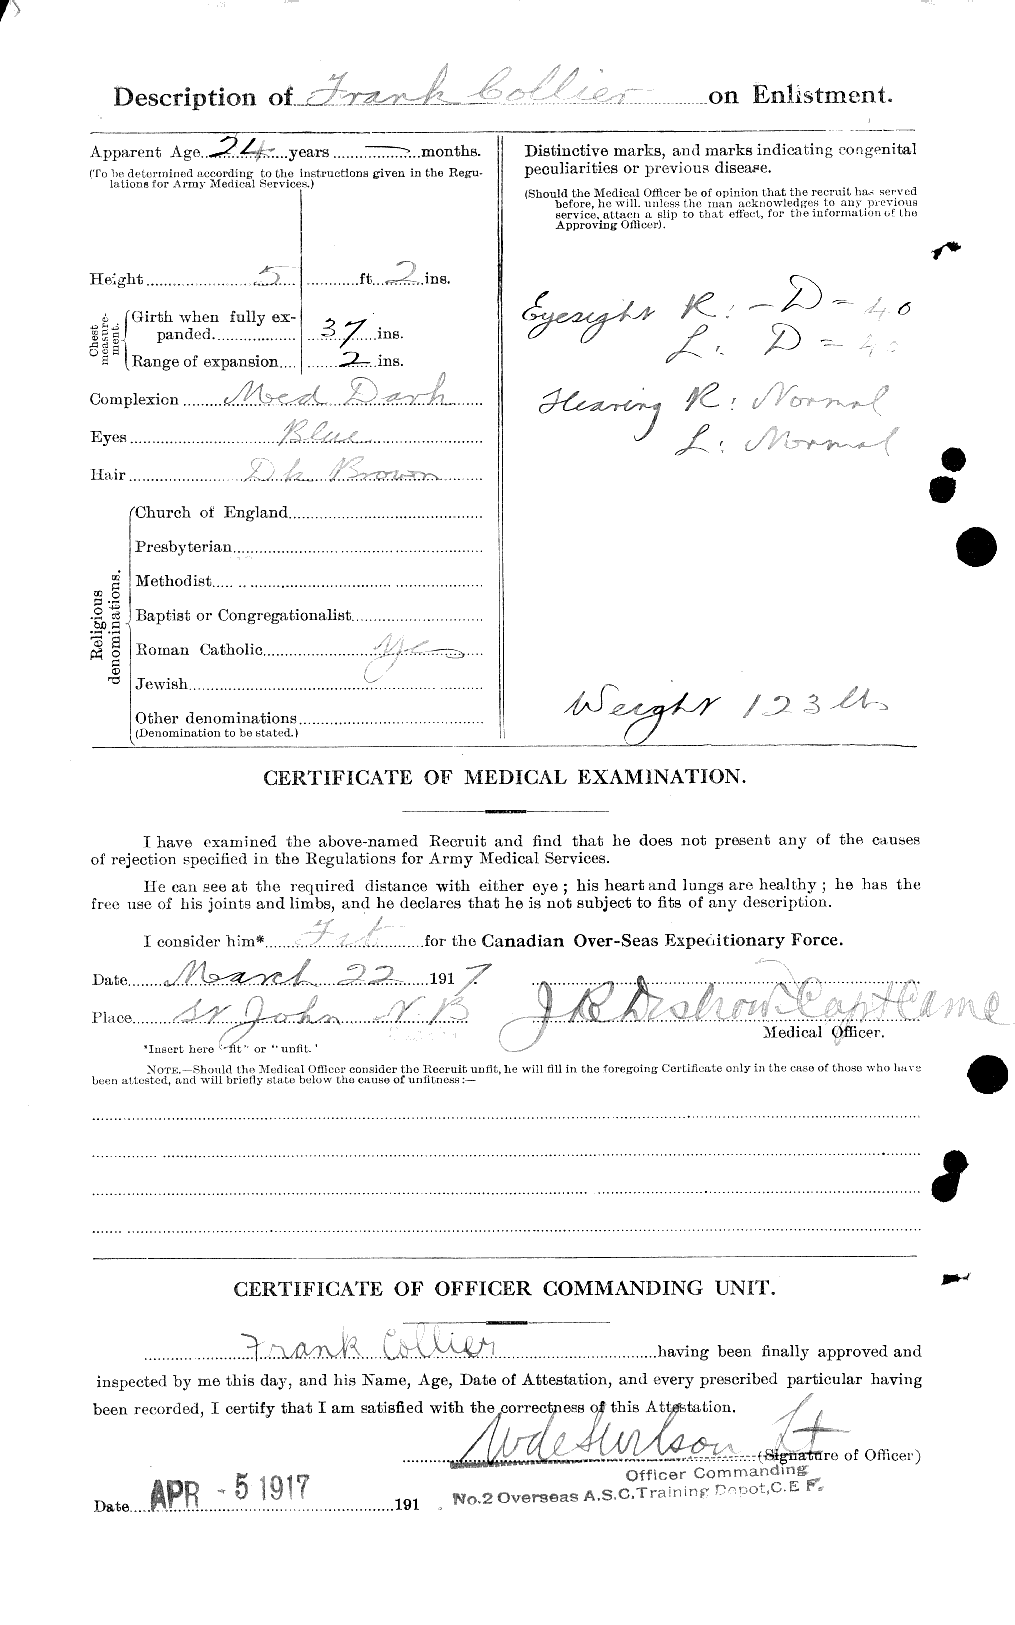 Personnel Records of the First World War - CEF 028793b